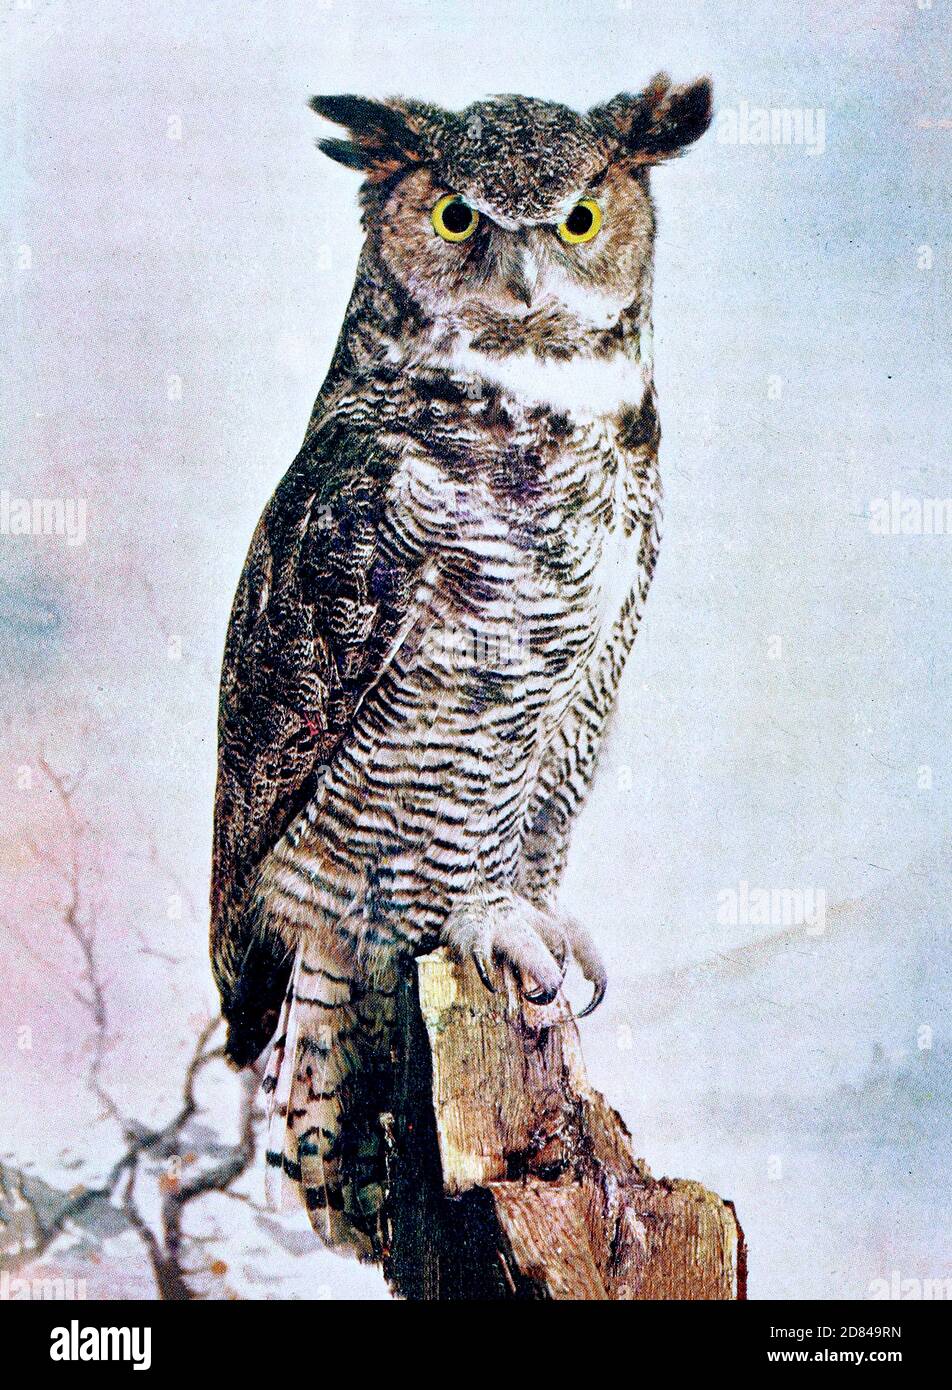 The great horned owl (Bubo virginianus), also known as the tiger owl (originally derived from early naturalists' description as the "winged tiger" or "tiger of the air") or the hoot owl,[2] is a large owl native to the Americas. It is an extremely adaptable bird with a vast range and is the most widely distributed true owl in the Americas.[3] Its primary diet is rabbits and hares, rats and mice, and voles, although it freely hunts any animal it can overtake, including rodents and other small mammals, larger mid-sized mammals, birds, reptiles, amphibians, and invertebrates. From Birds : illustr Stock Photo